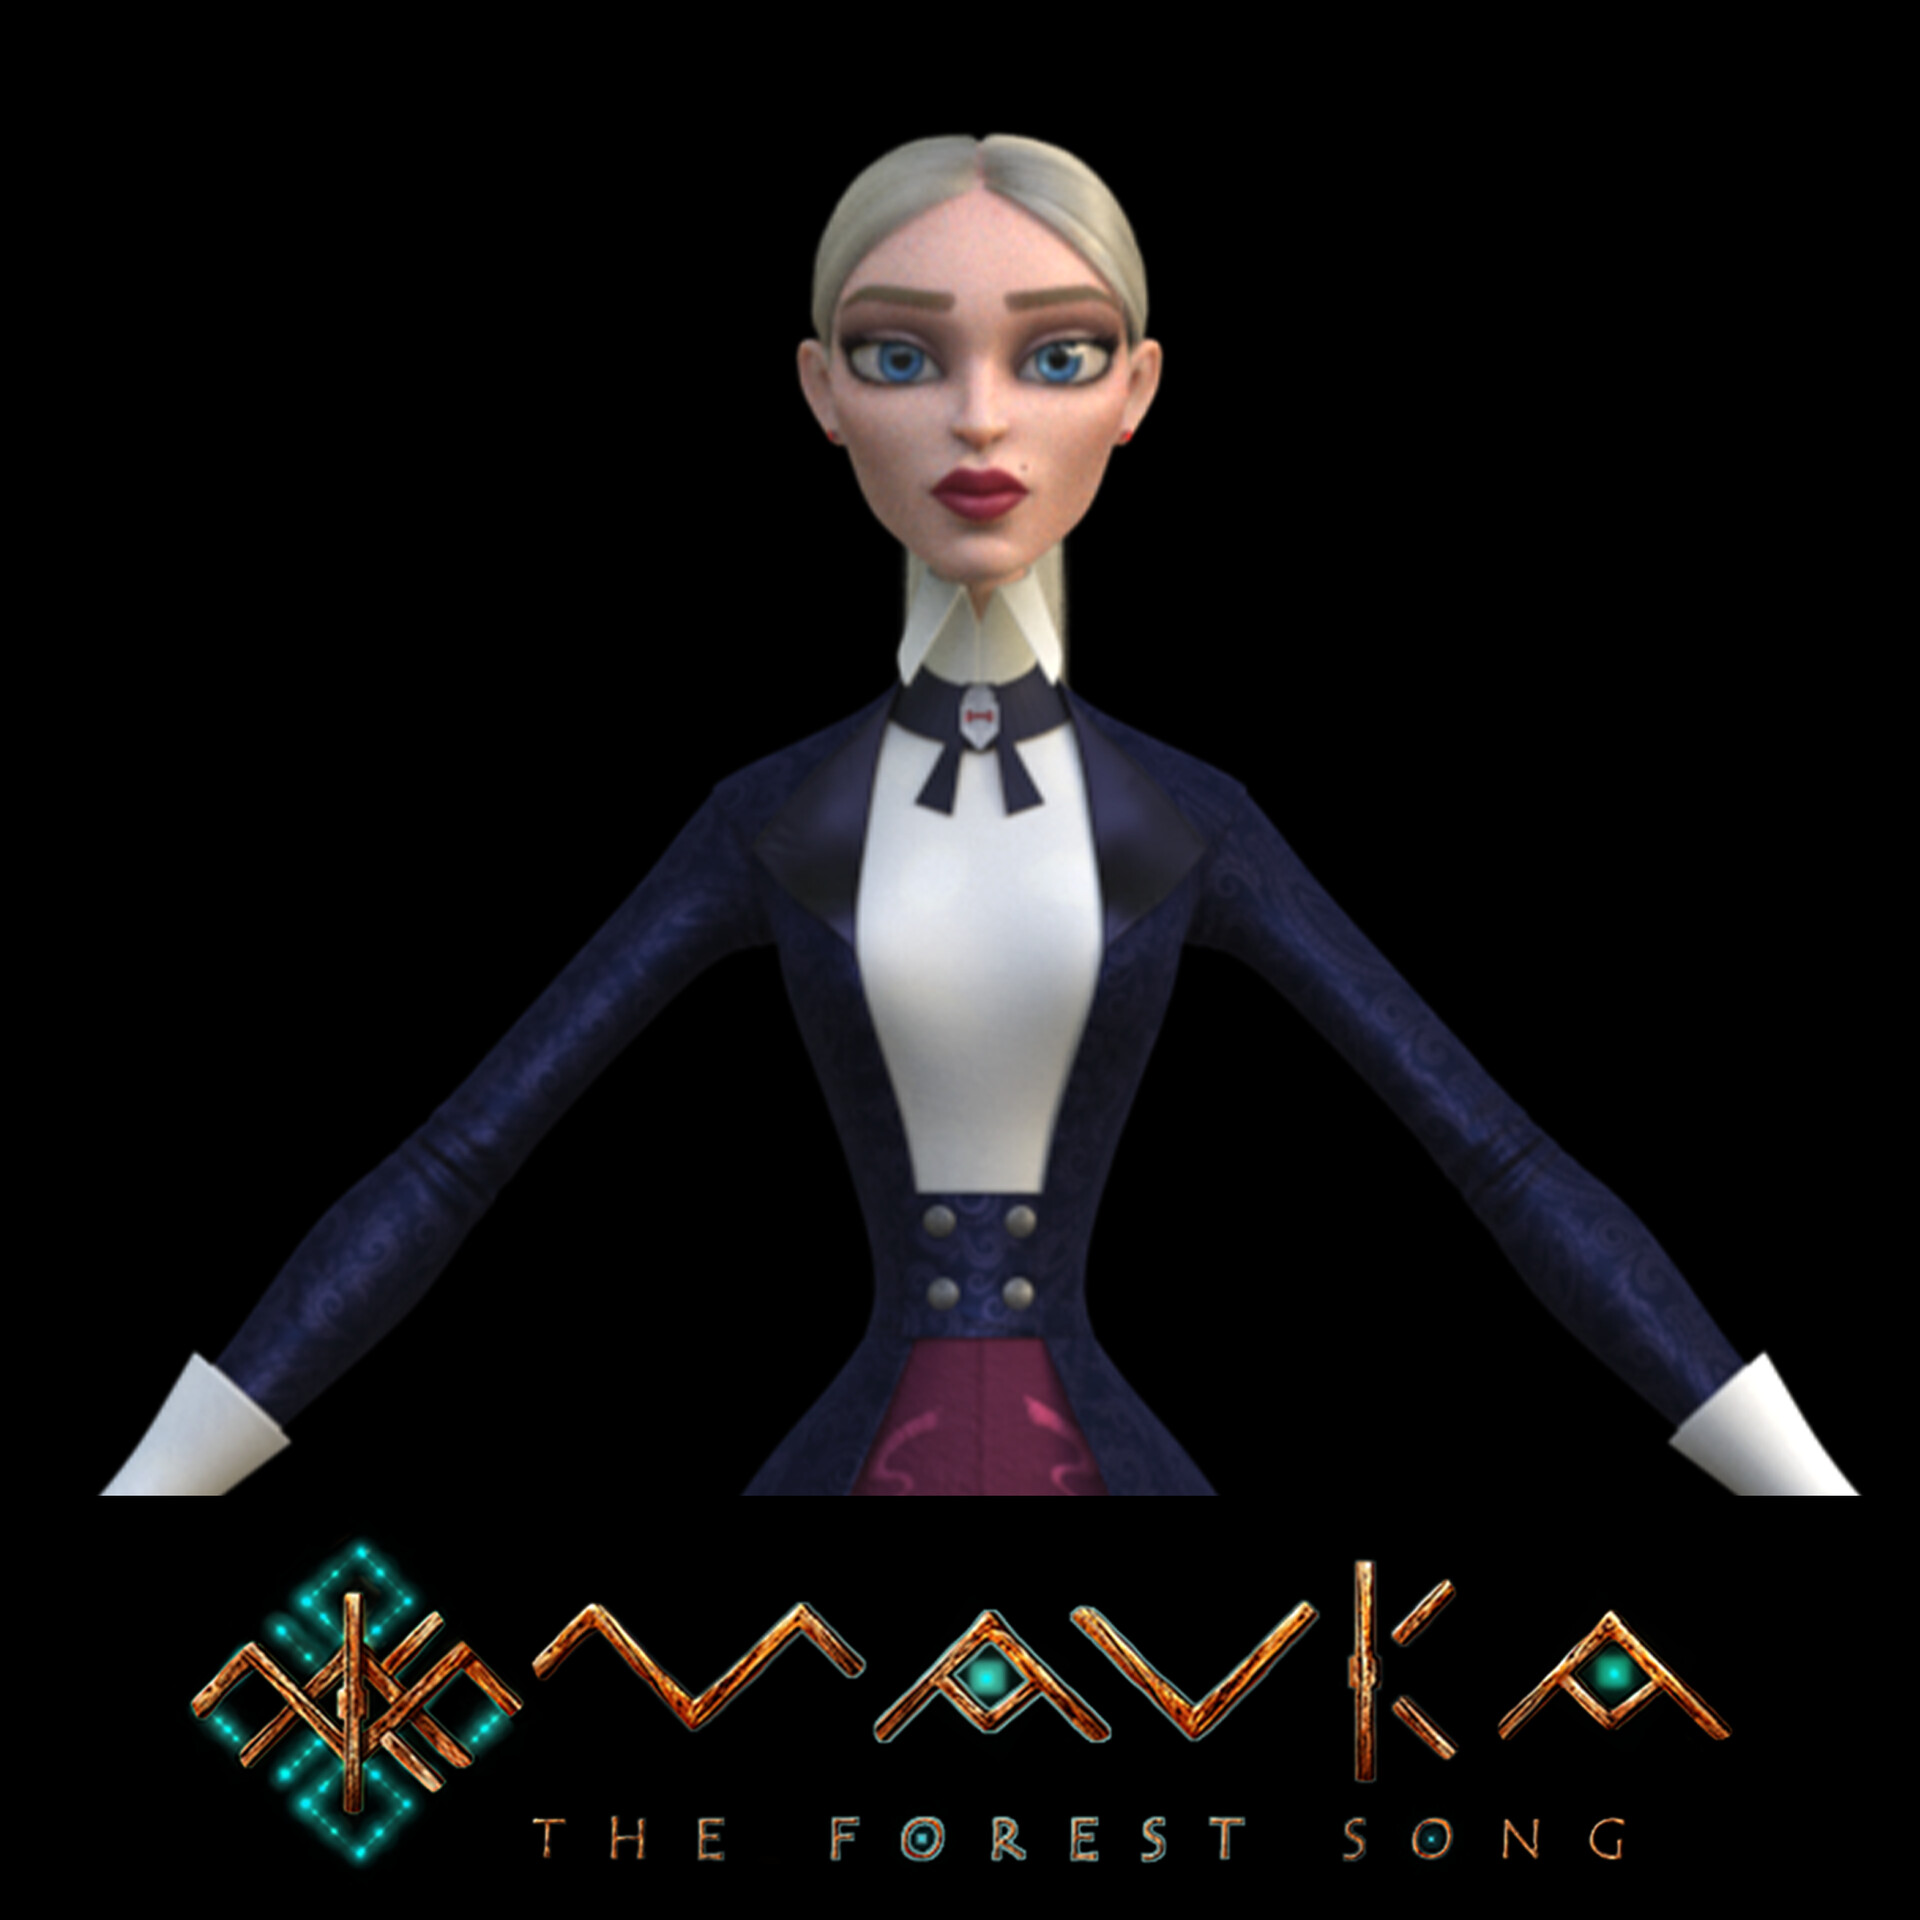 ArtStation - MAVKA. THE FOREST SONG. Posters for animated film